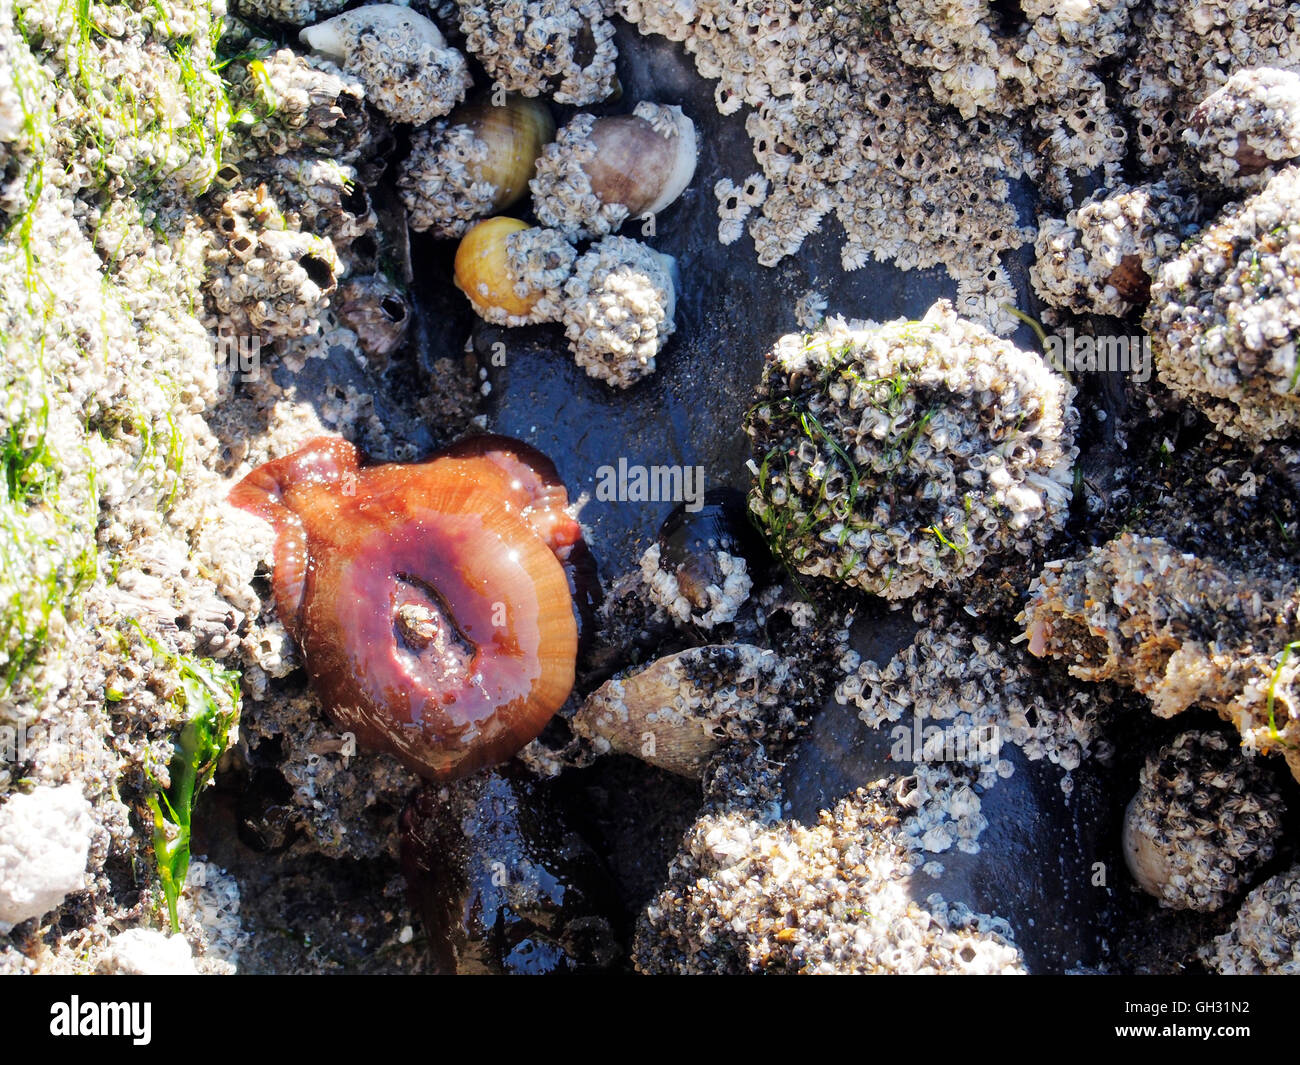 Marine flora and fauna on a rock exposed at low tide showing barnacles, red Beadlet anemone and periwinkles Stock Photo